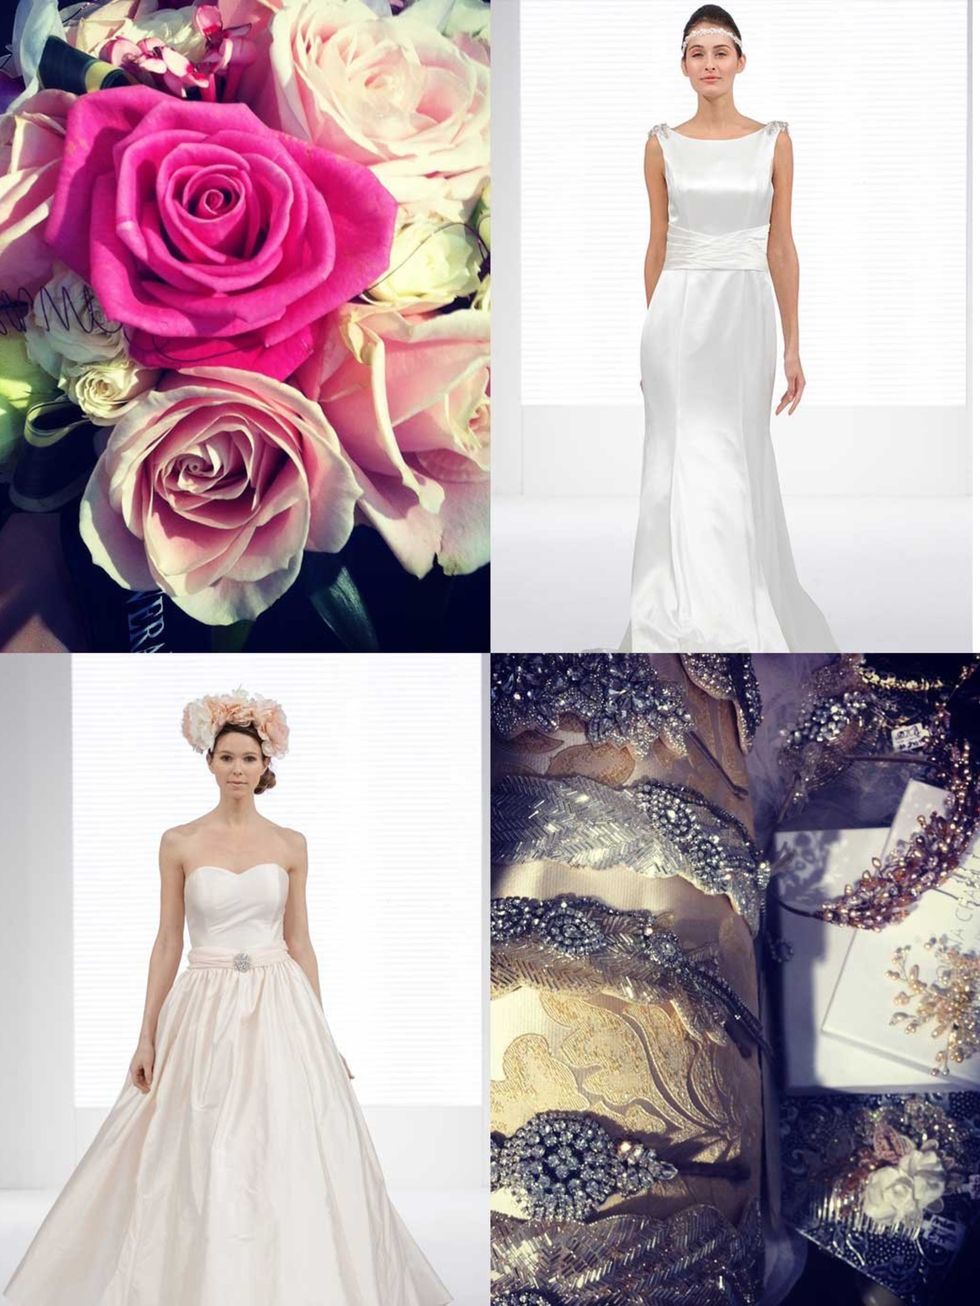 <p>The biggest draw at the <a href="http://www.elleuk.com/style/wedding-blog/national-wedding-show-2014-bridal-inspiration-wedding-dresses-london-olympia-manchester-birmingham">National Wedding Show</a> is its warren of bridal boutiques, providing a golde